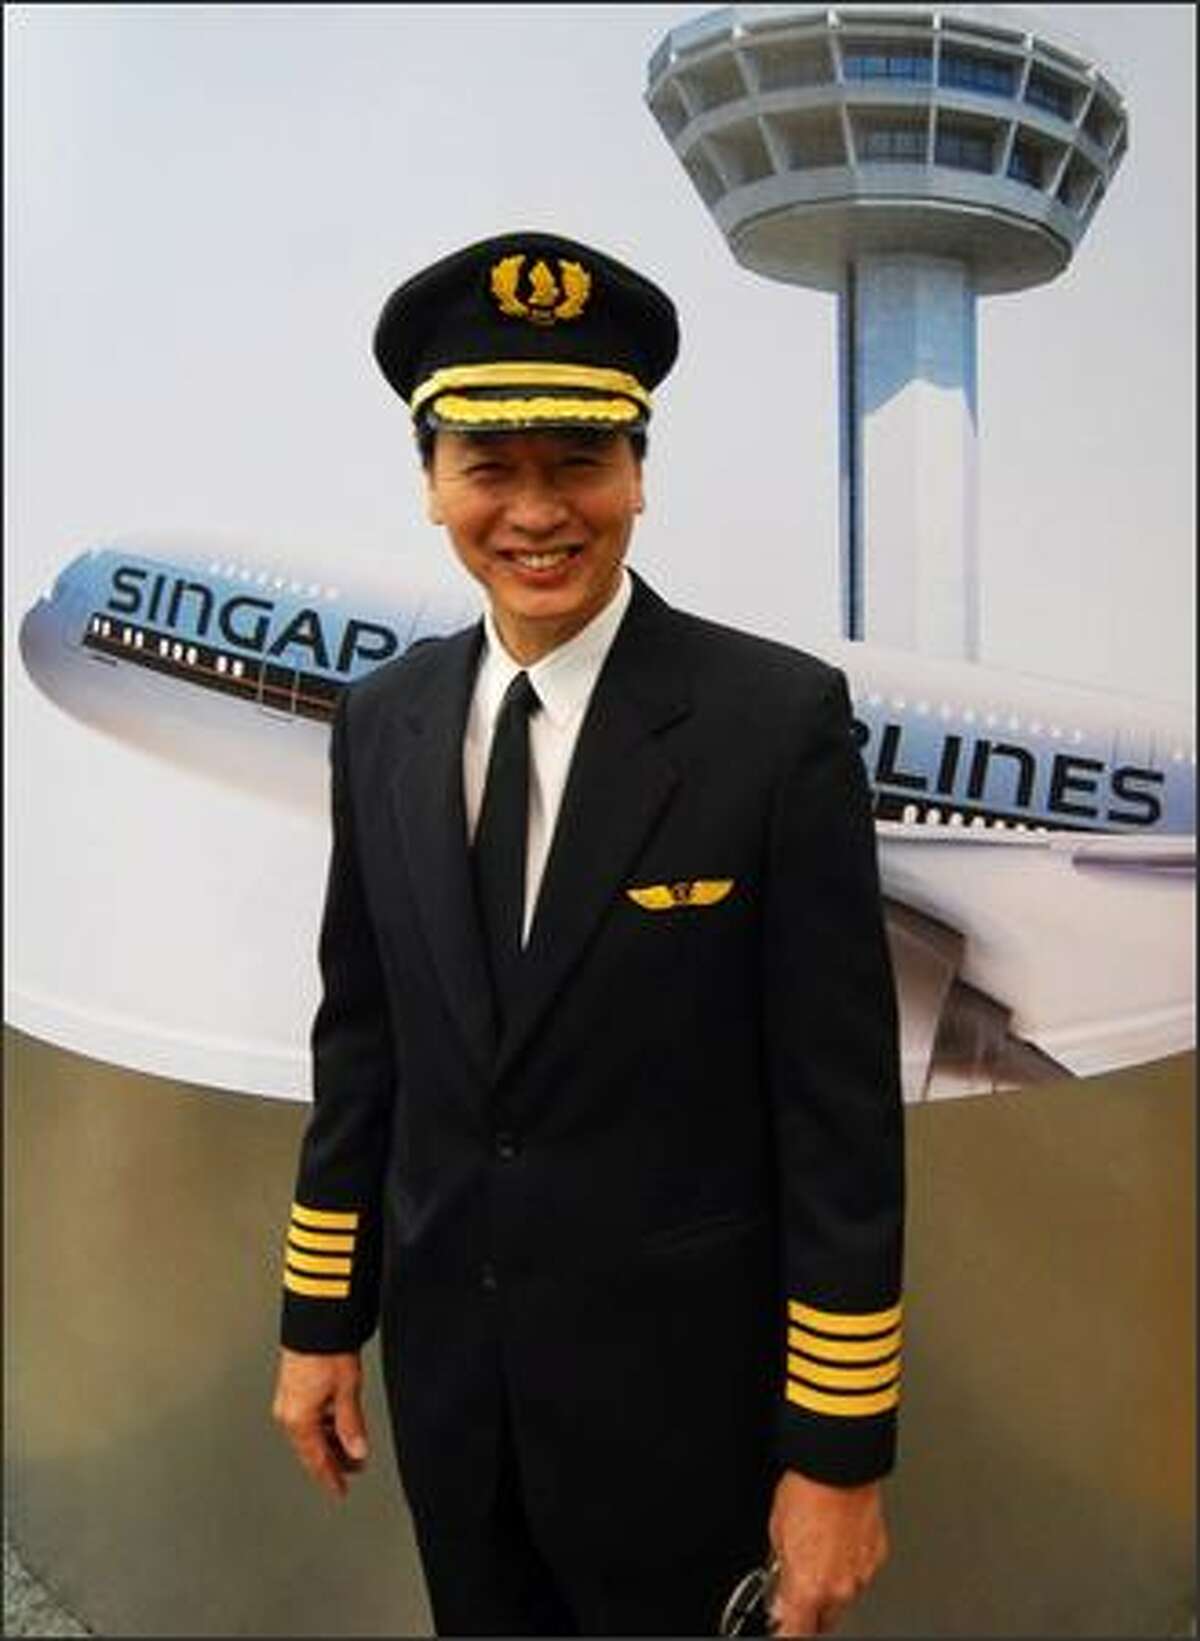 Captain Robert Ting poses for photographers before the maiden flight.